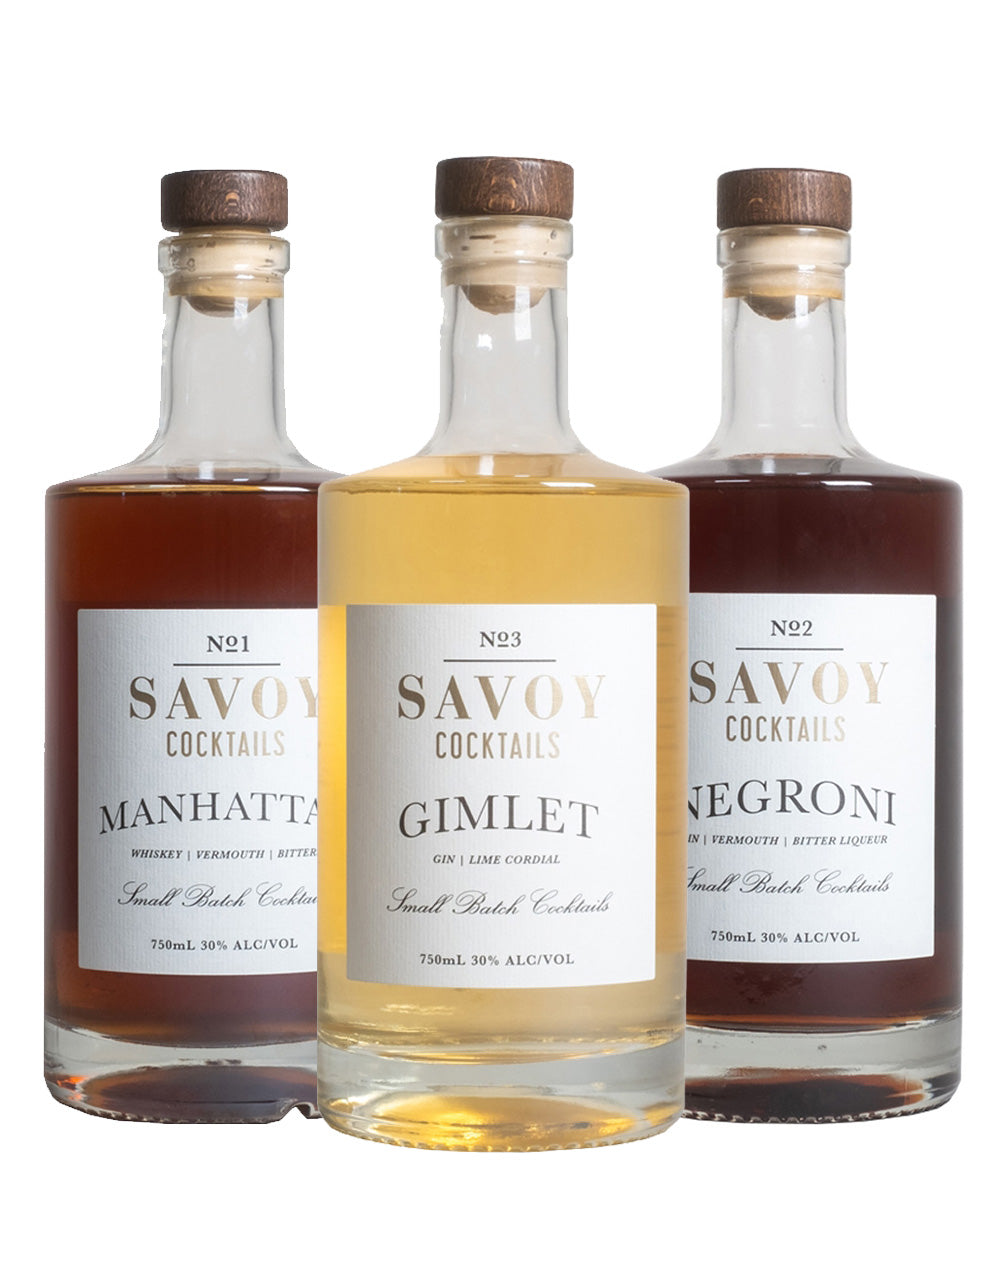 Savoy Cocktails 3 Bottles Buy Online Or Send As A Gift